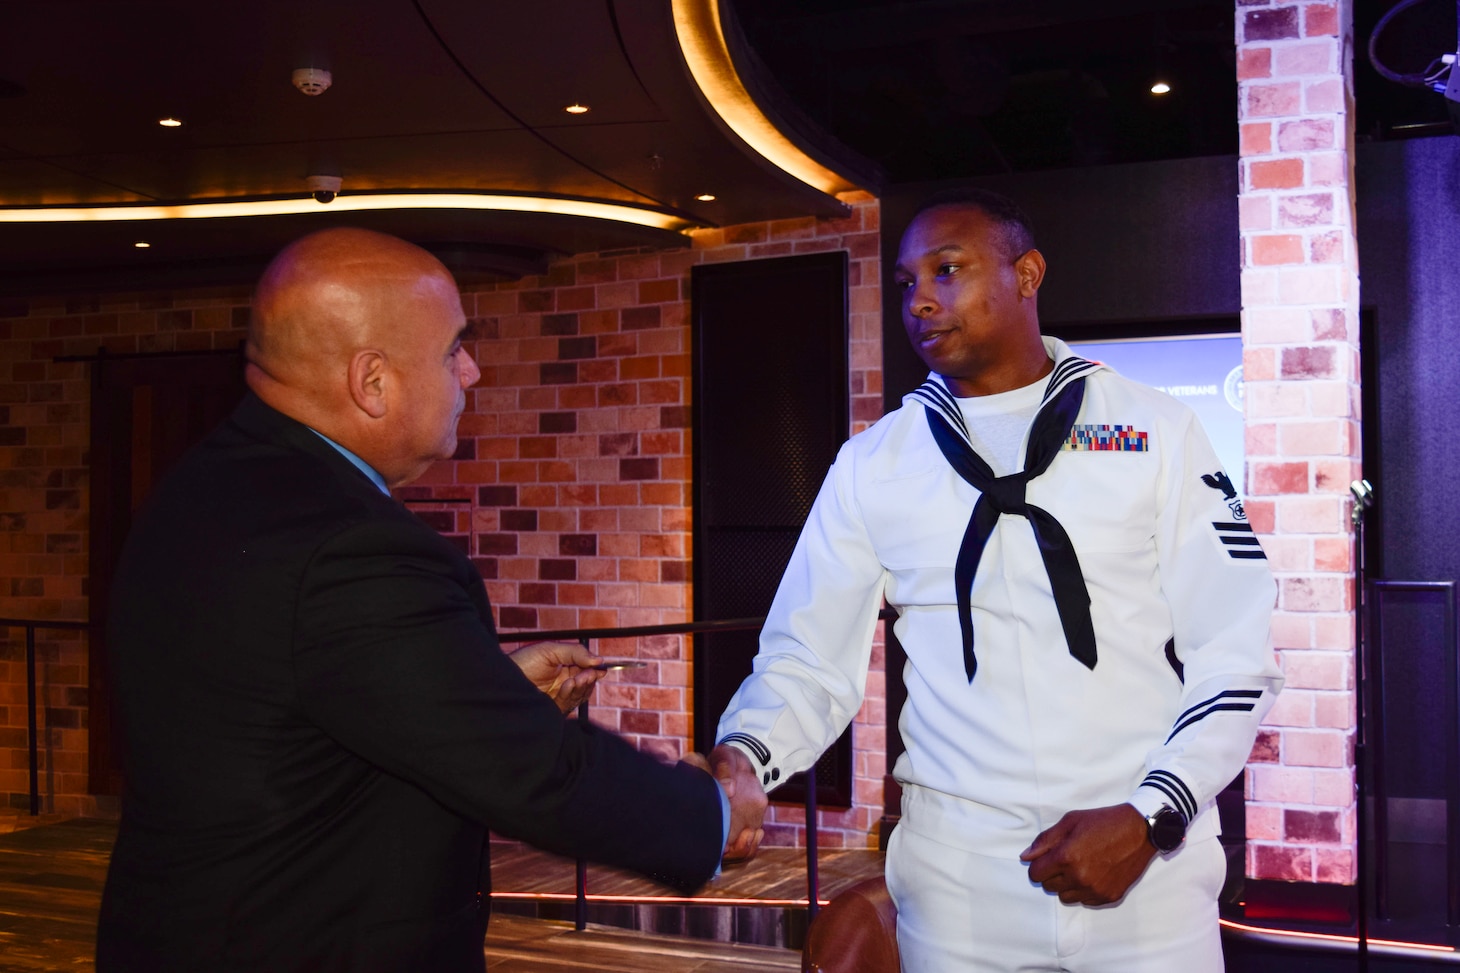 231108-N-RF885-1066 MIAMI (Nov. 8, 2023) - Master-at-Arms 1st Class Andrew Williams, a member of the Navy Reserve Center, Miami Color Guard, right, receives a coin from Norwegian Cruise Line’s (NCL) President, David Herrera, for his participation in a reception honoring Gold Star families aboard the Norwegian Joy, a Breakaway Plus-class cruise ship, docked in the Port of Miami, Nov. 8, 2023. NCL along with Honor and Remember, a non-profit organization whose flag recognizes the sacrifice of fallen heroes' families, have teamed up to fly their memorial flags across the 18-ship fleet. NRC Miami generates mobilization readiness in support of Joint Forces deployed globally by providing Reserve Component expertise, administrative services, and training to over 550 Select Reservists.(U.S. Navy photo by Mass Communication Specialist 1st Class Natalia Murillo/released)